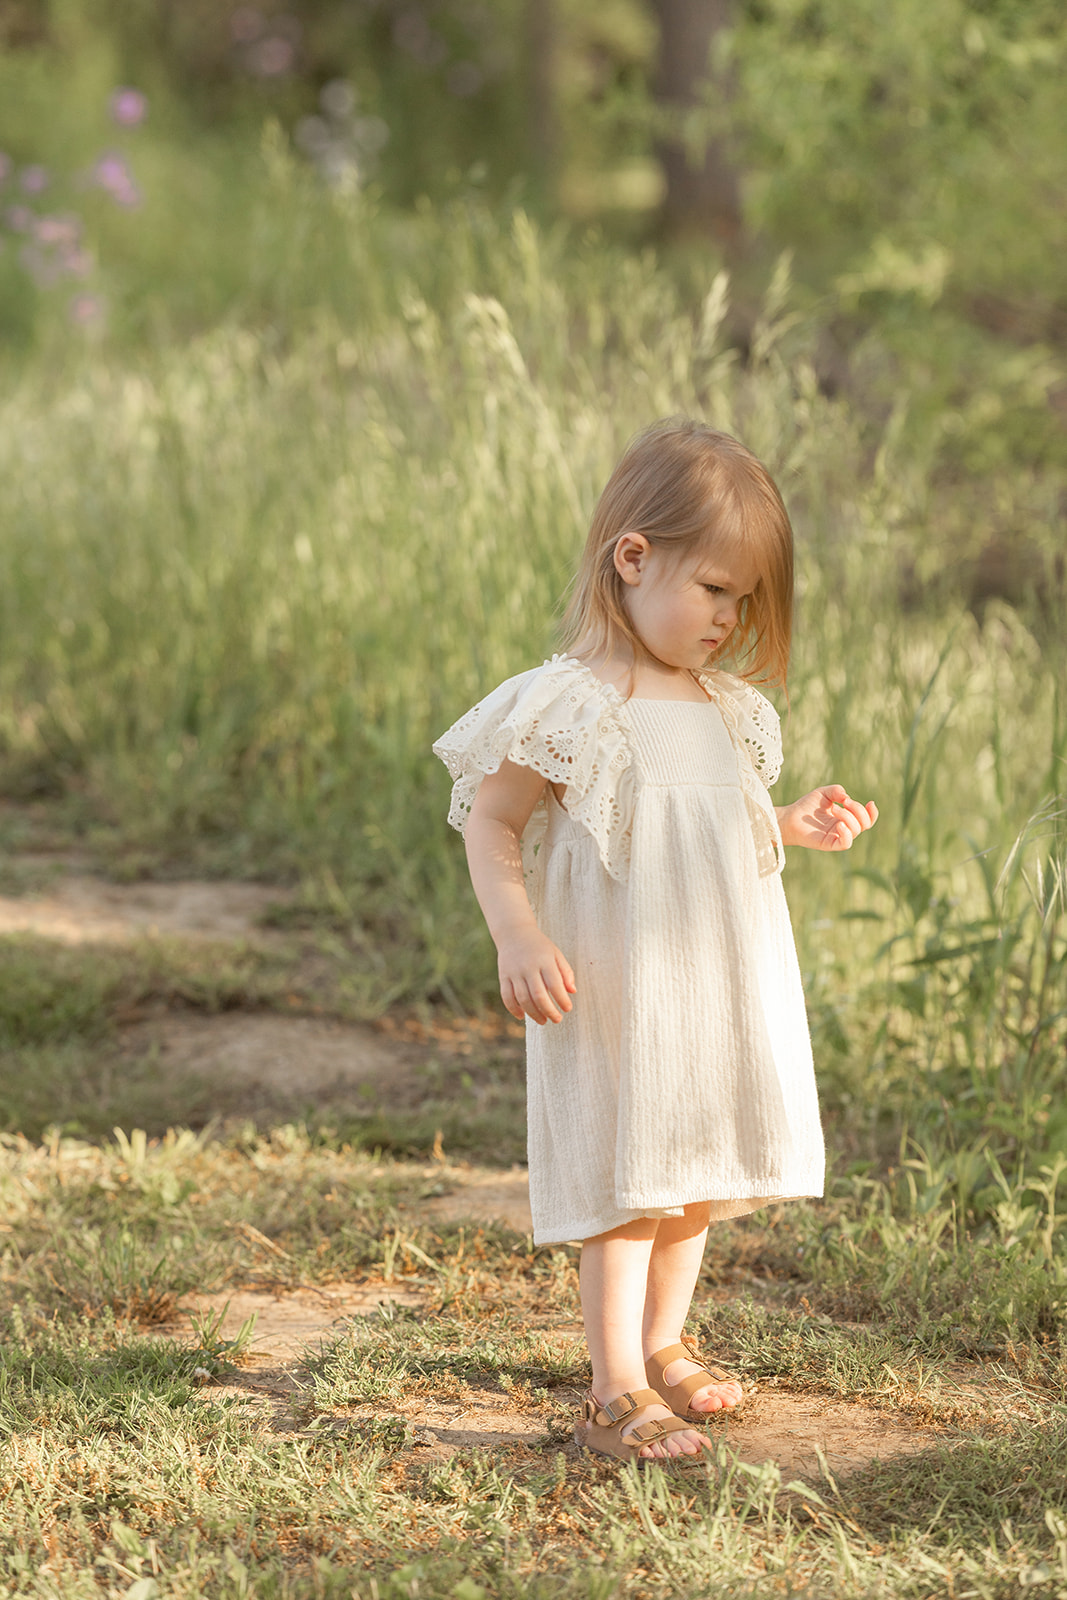 A young girl walks down a park trail lined with tall grass in a white dress